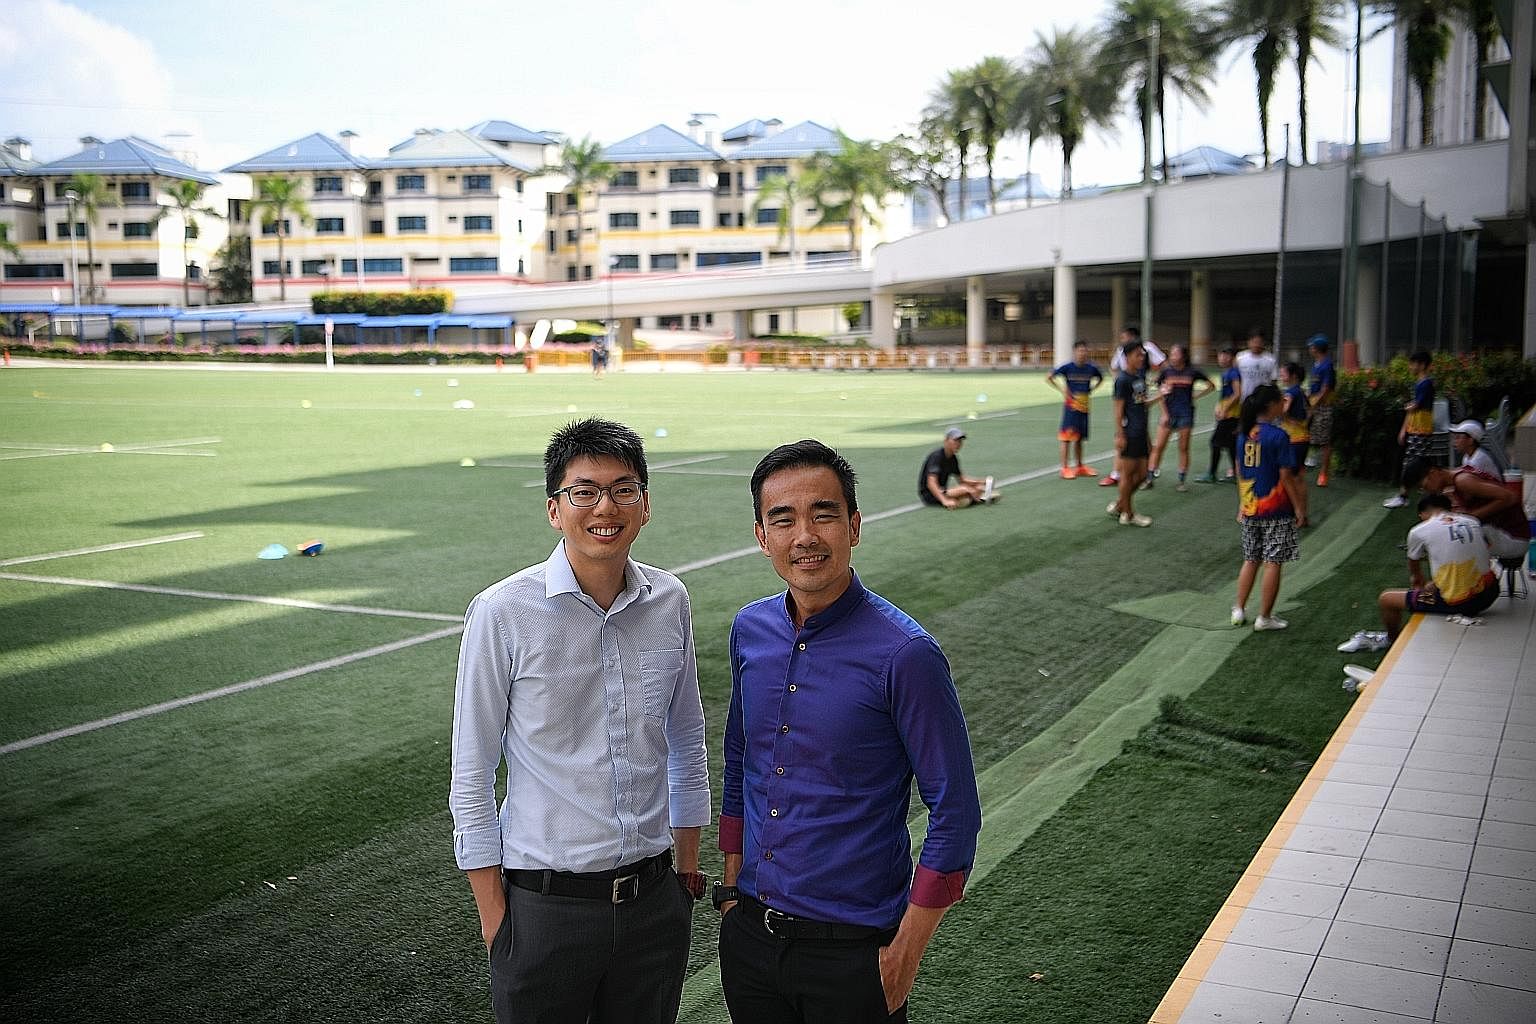 Mr Tan Aik Wen, one of Anglo-Chinese School (Independent)'s 27 perfect scorers in 2017: "To do well in such a system, I tried to pace myself. This meant not studying excessively hard and burning out early, which many IB students are prone to do, give